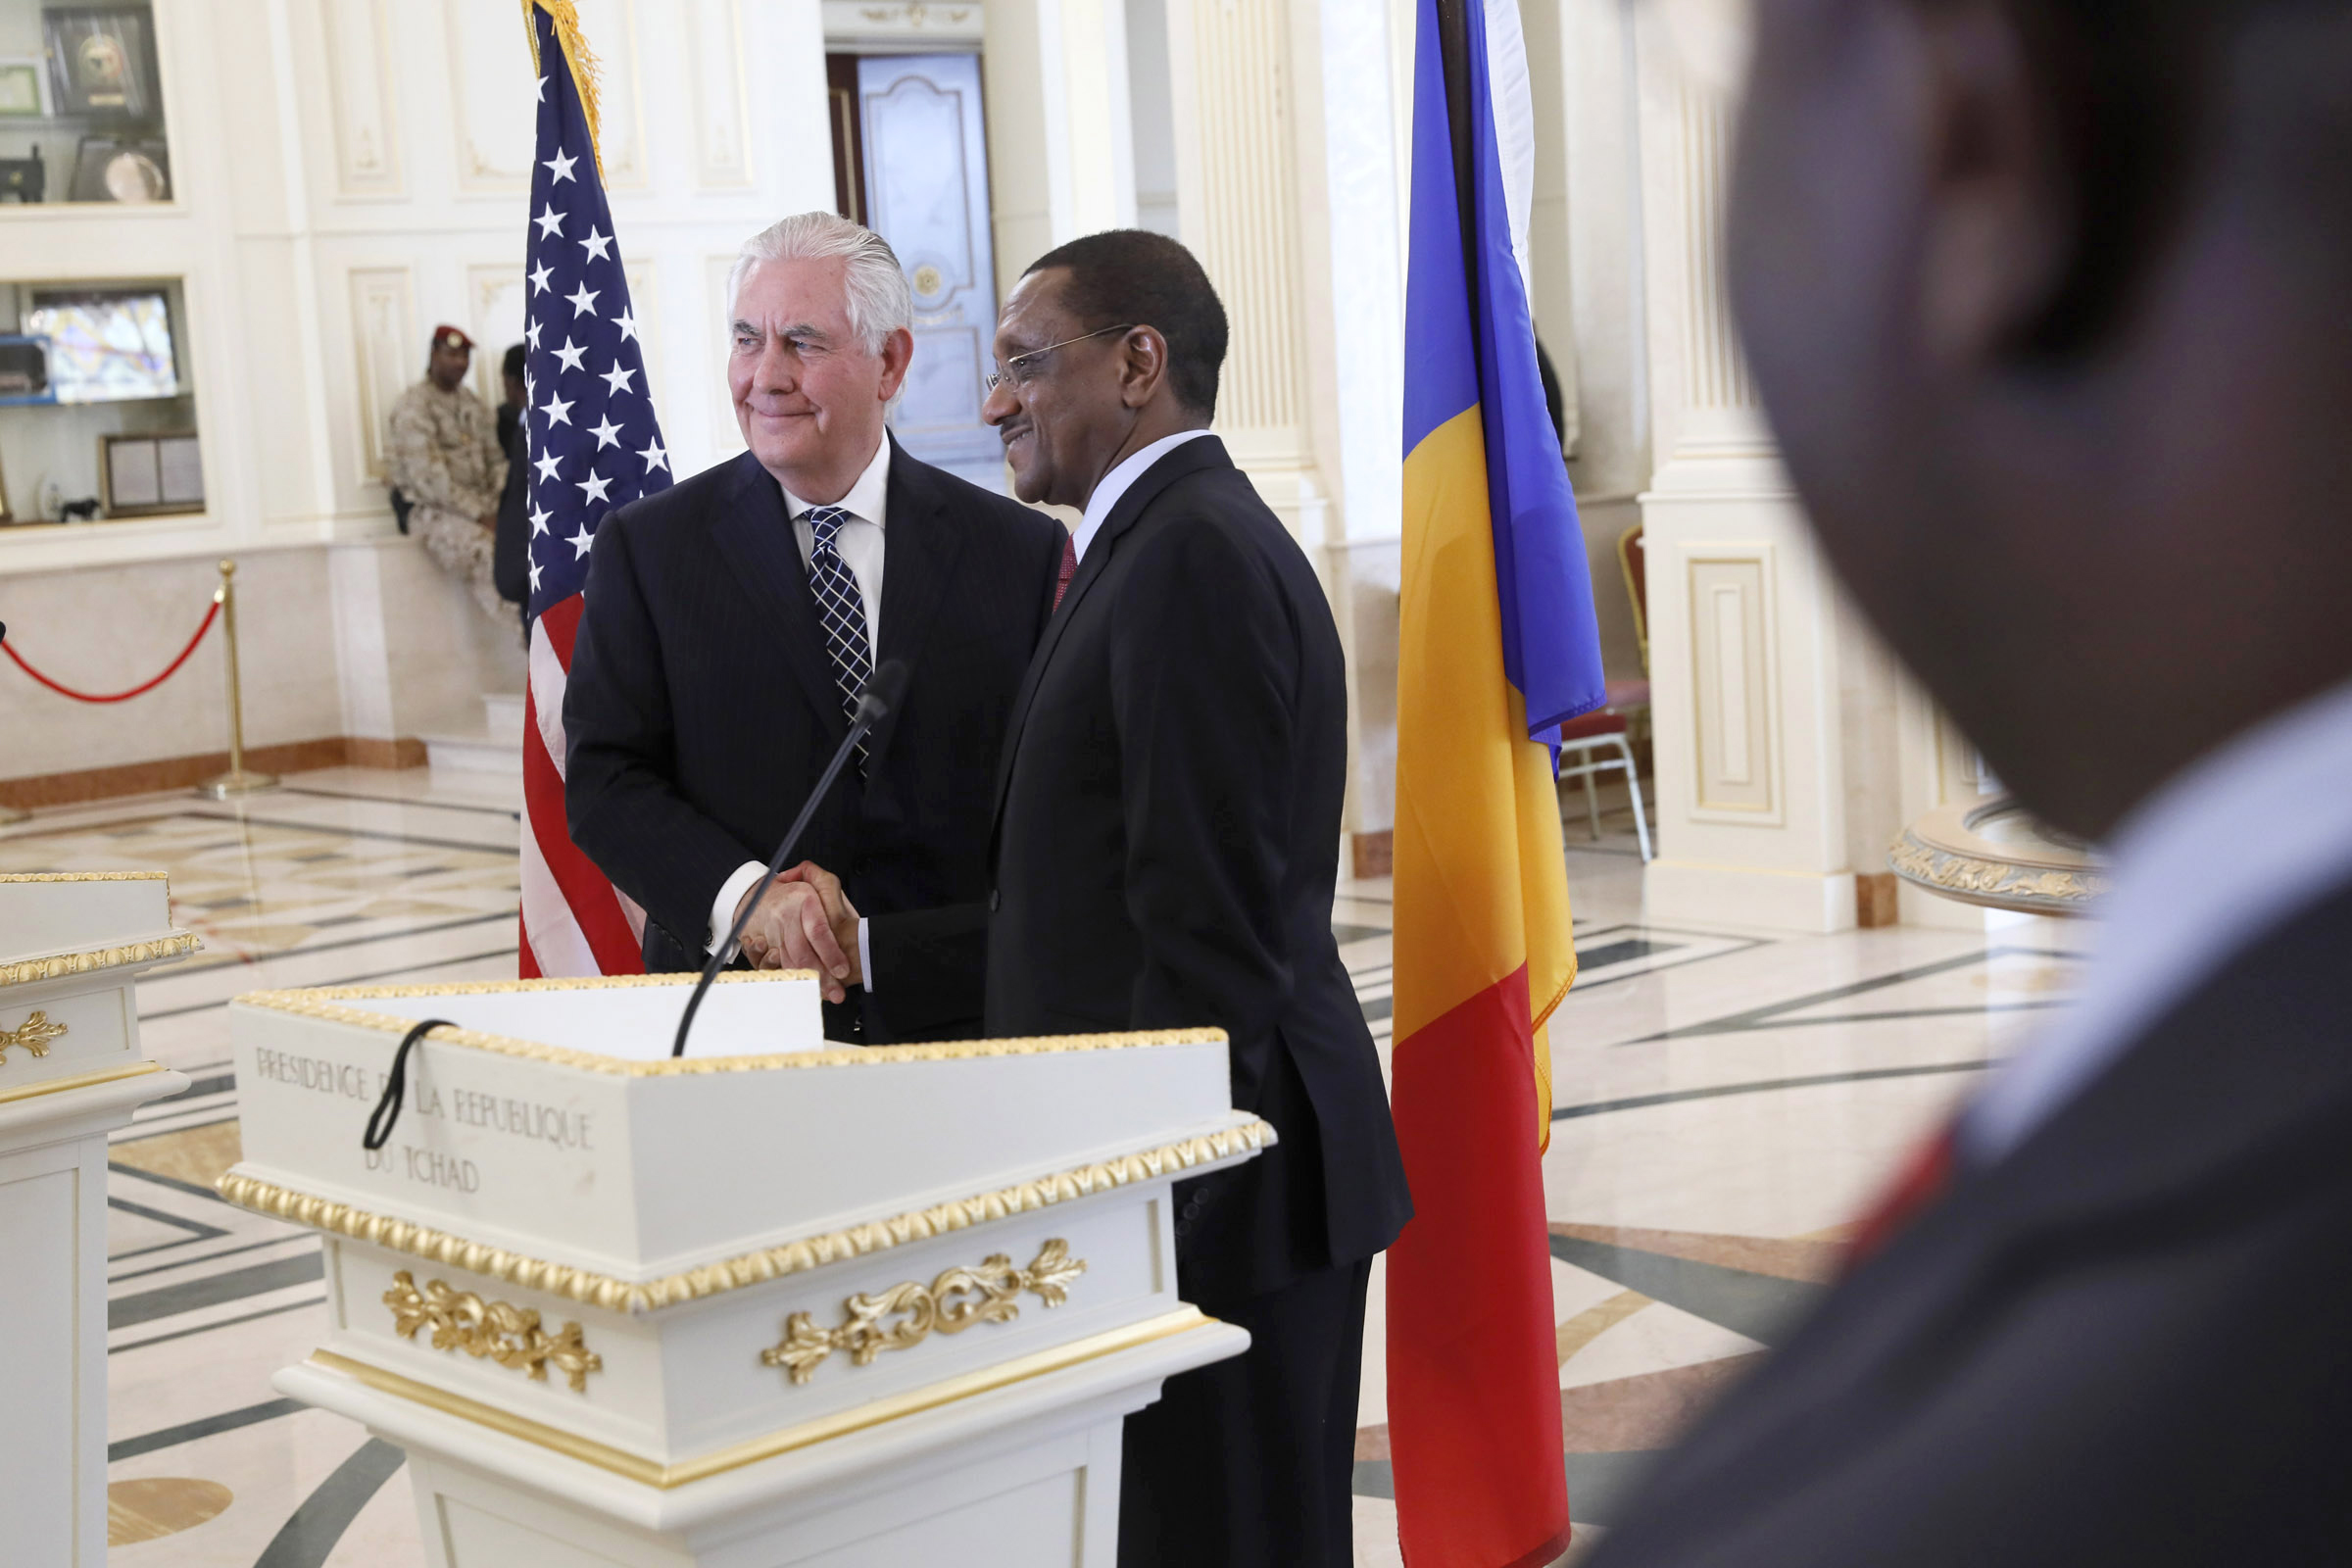 PHOTO: U.S. Secretary of State Rex Tillerson shakes hands after a news conference with Chad's Foreign Minister Mahamat Zene Cherif in N'Djamena, Chad, March 12, 2018.